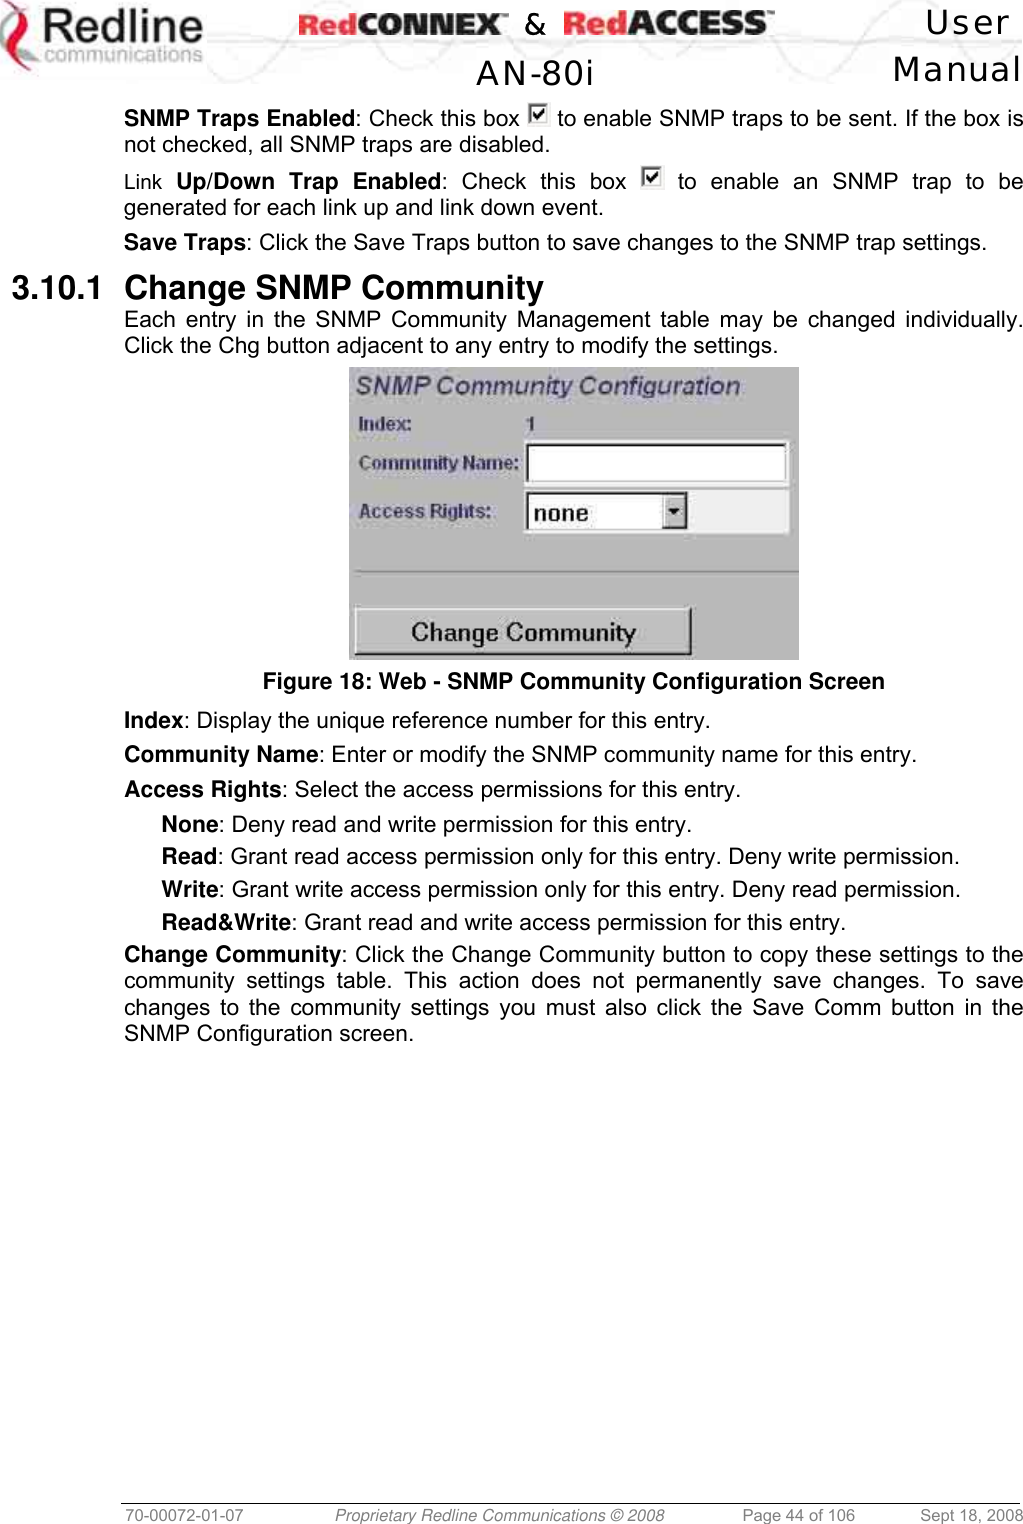    &amp;  User  AN-80i Manual  70-00072-01-07  Proprietary Redline Communications © 2008  Page 44 of 106  Sept 18, 2008 SNMP Traps Enabled: Check this box   to enable SNMP traps to be sent. If the box is not checked, all SNMP traps are disabled. Link Up/Down Trap Enabled: Check this box   to enable an SNMP trap to be generated for each link up and link down event. Save Traps: Click the Save Traps button to save changes to the SNMP trap settings. 3.10.1  Change SNMP Community Each entry in the SNMP Community Management table may be changed individually. Click the Chg button adjacent to any entry to modify the settings.  Figure 18: Web - SNMP Community Configuration Screen  Index: Display the unique reference number for this entry. Community Name: Enter or modify the SNMP community name for this entry. Access Rights: Select the access permissions for this entry. None: Deny read and write permission for this entry. Read: Grant read access permission only for this entry. Deny write permission. Write: Grant write access permission only for this entry. Deny read permission. Read&amp;Write: Grant read and write access permission for this entry. Change Community: Click the Change Community button to copy these settings to the community settings table. This action does not permanently save changes. To save changes to the community settings you must also click the Save Comm button in the SNMP Configuration screen. 